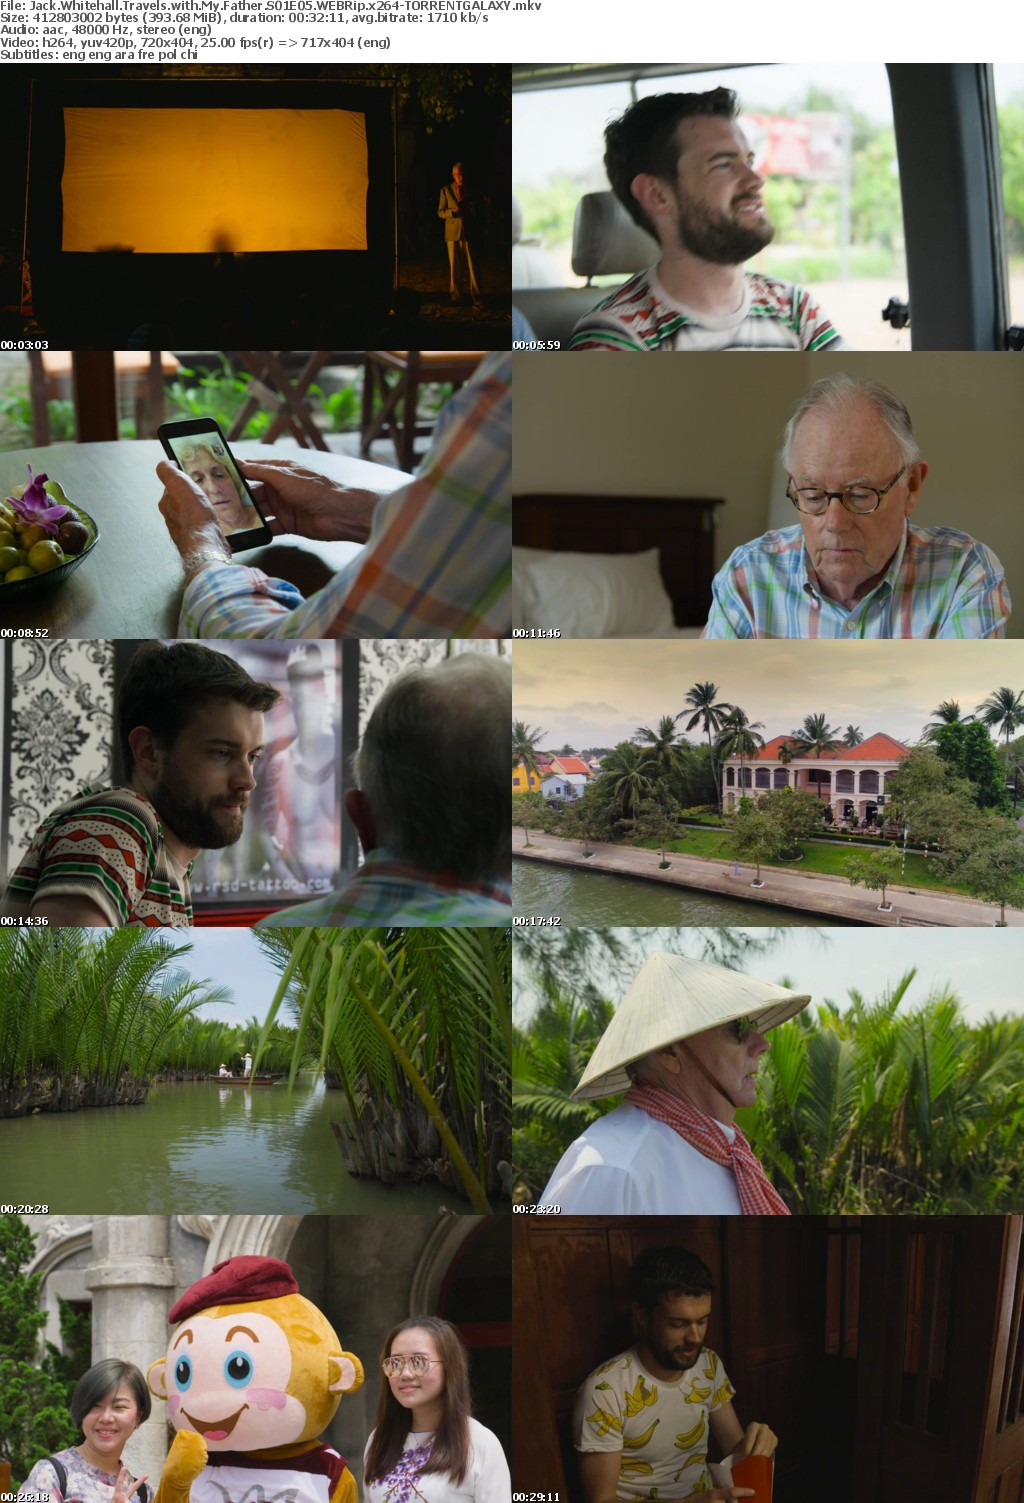 Jack Whitehall Travels with My Father S01E05 WEBRip x264-GALAXY